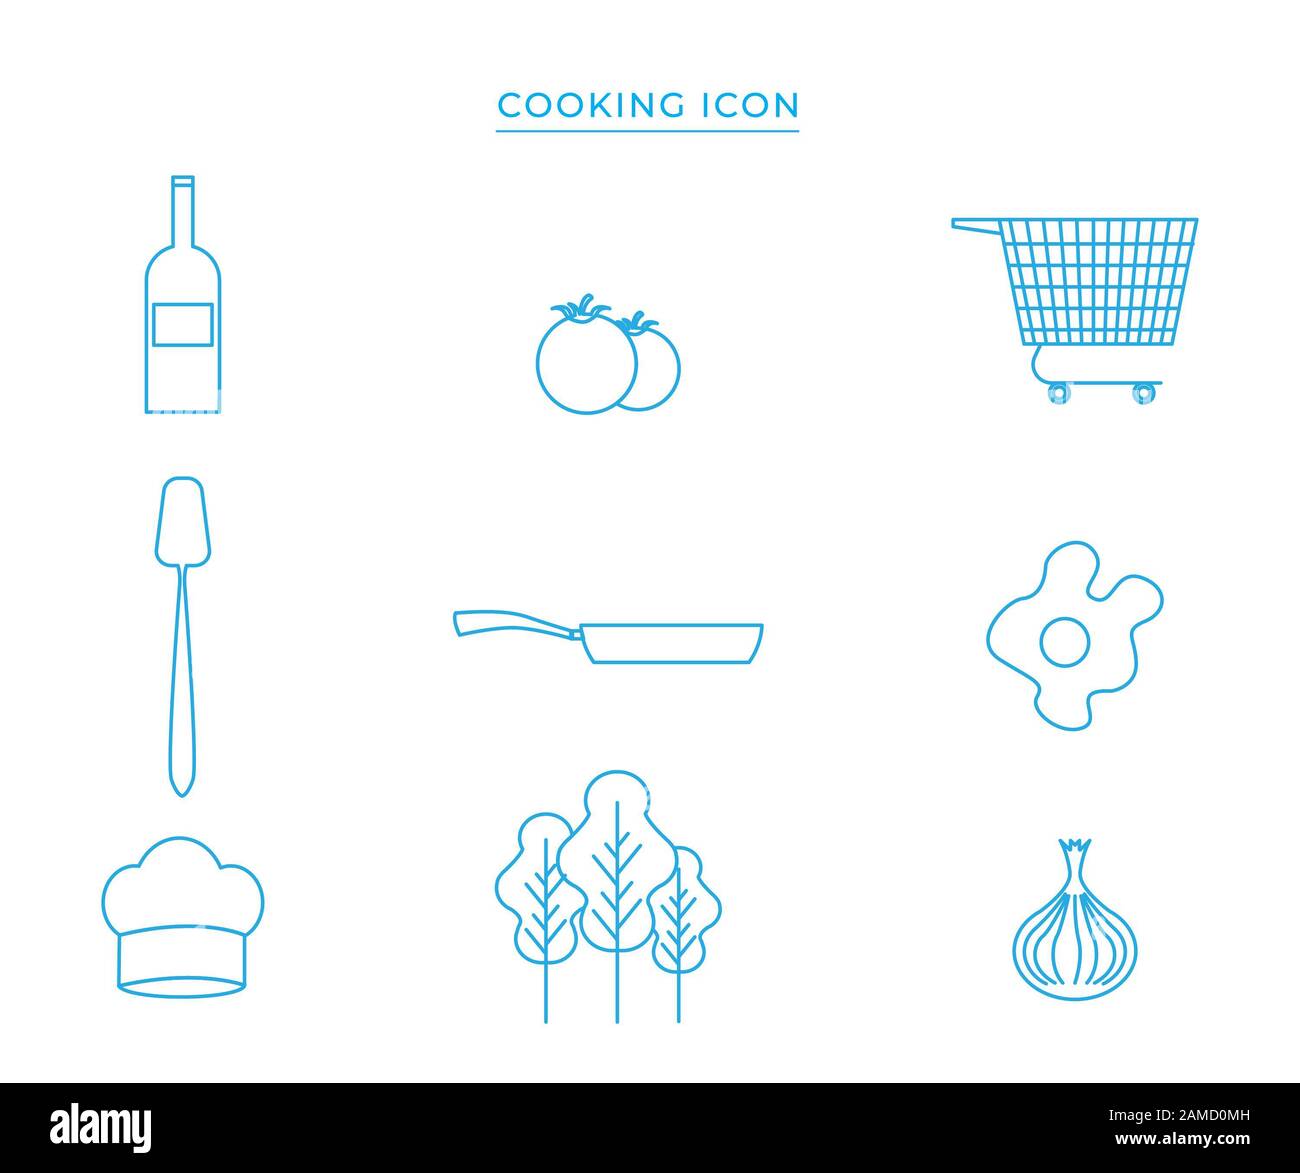 Group of cooking icon Stock Photo